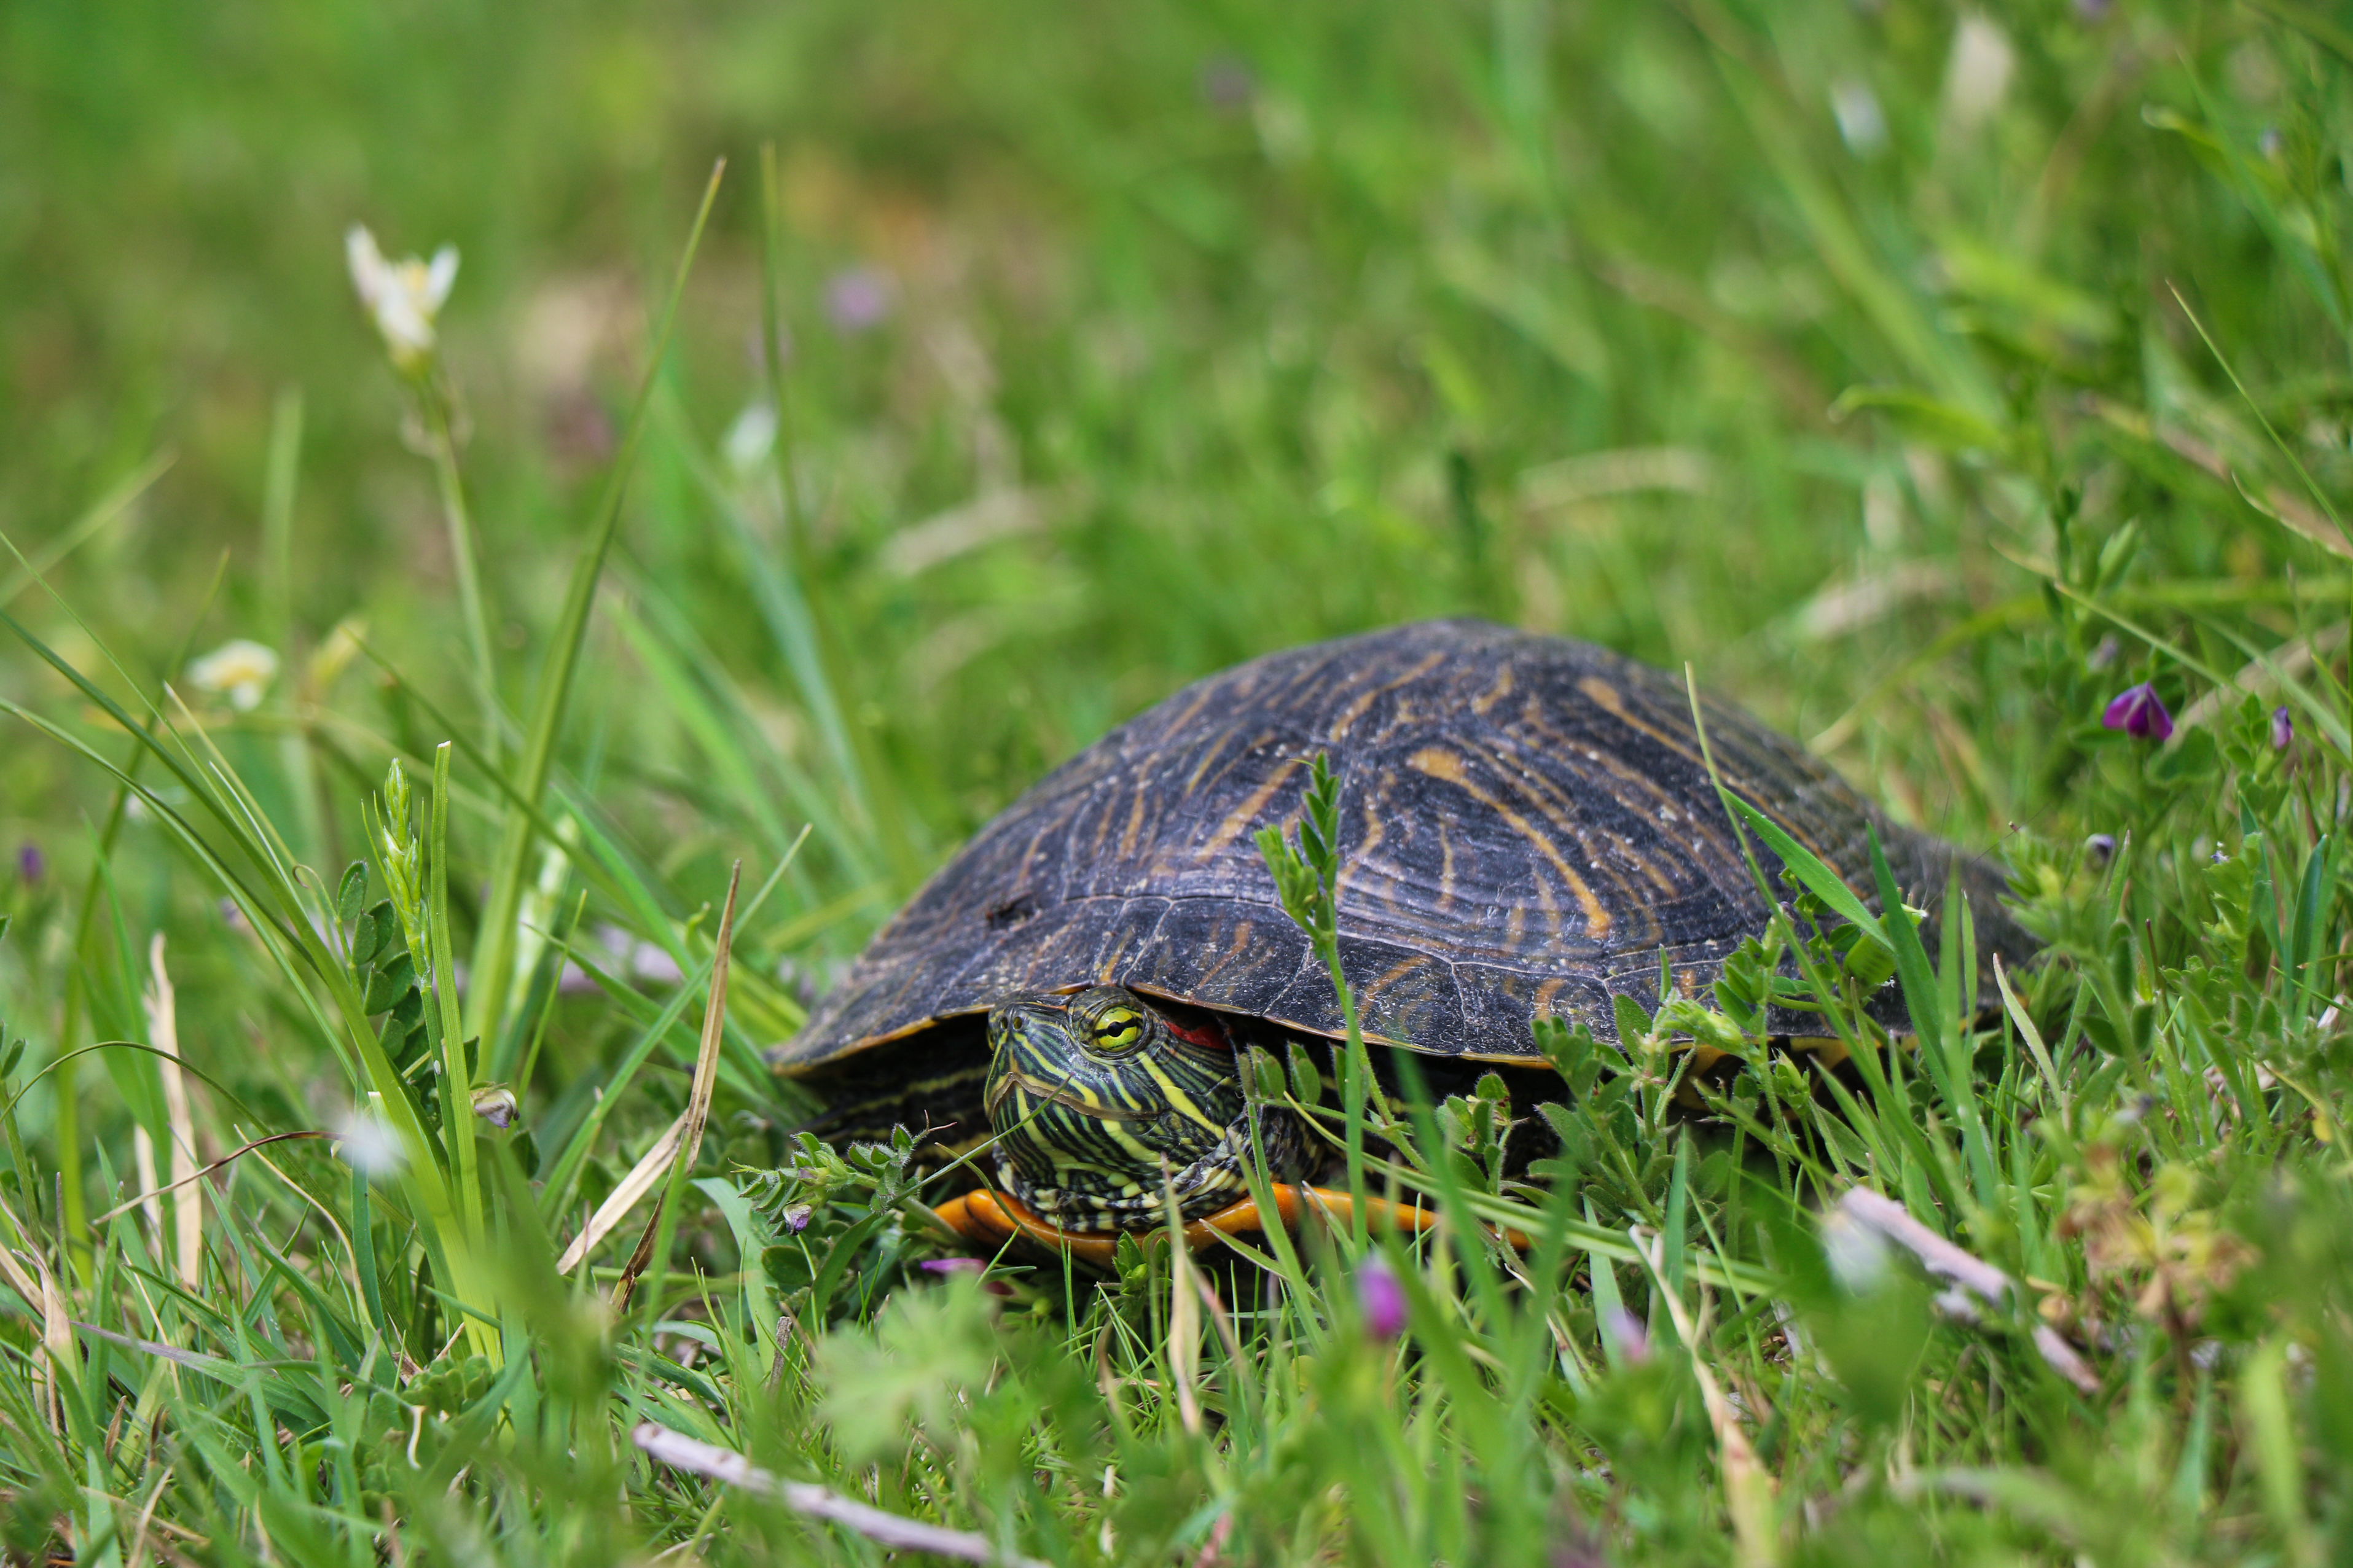 Turtle sitting outside in the grass.